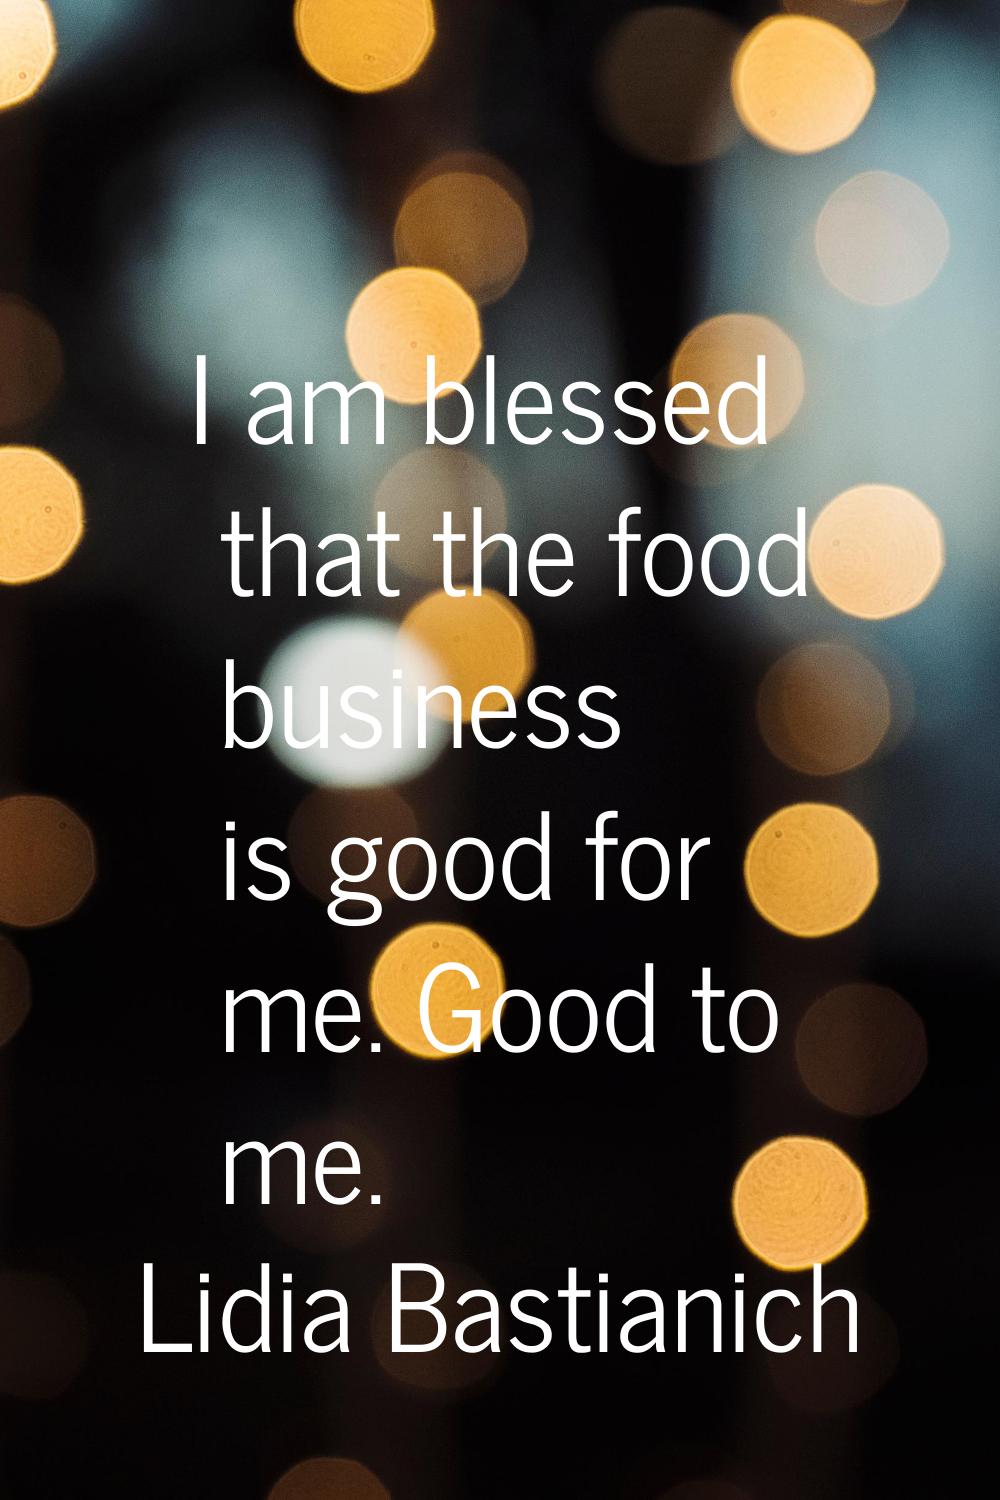 I am blessed that the food business is good for me. Good to me.